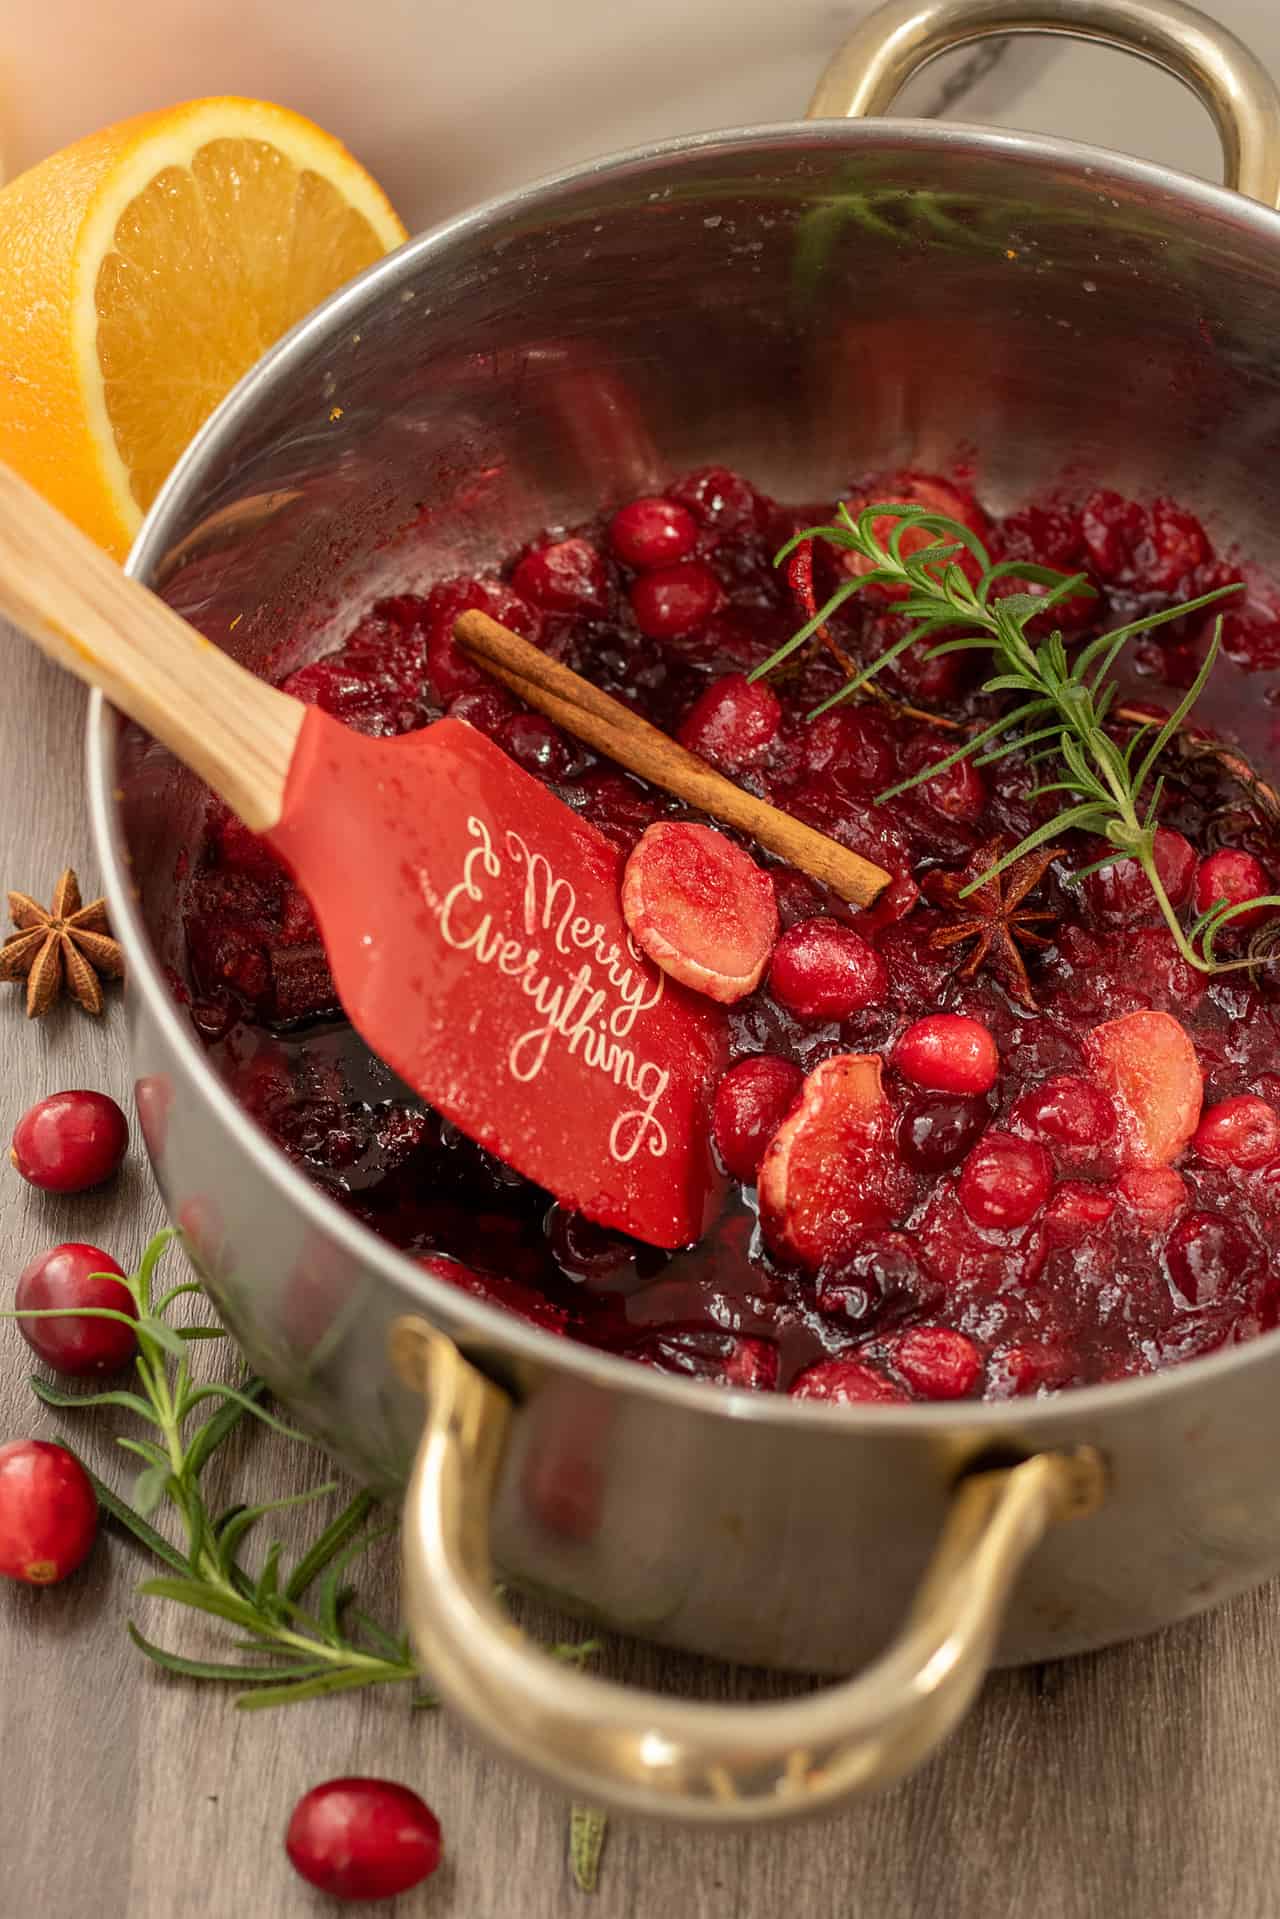 A silver sauce pan with gold handles filled with fresh cranberry syrup with whole cinnamon sticks, star anise, rosemary sprig, and ginger pieces.